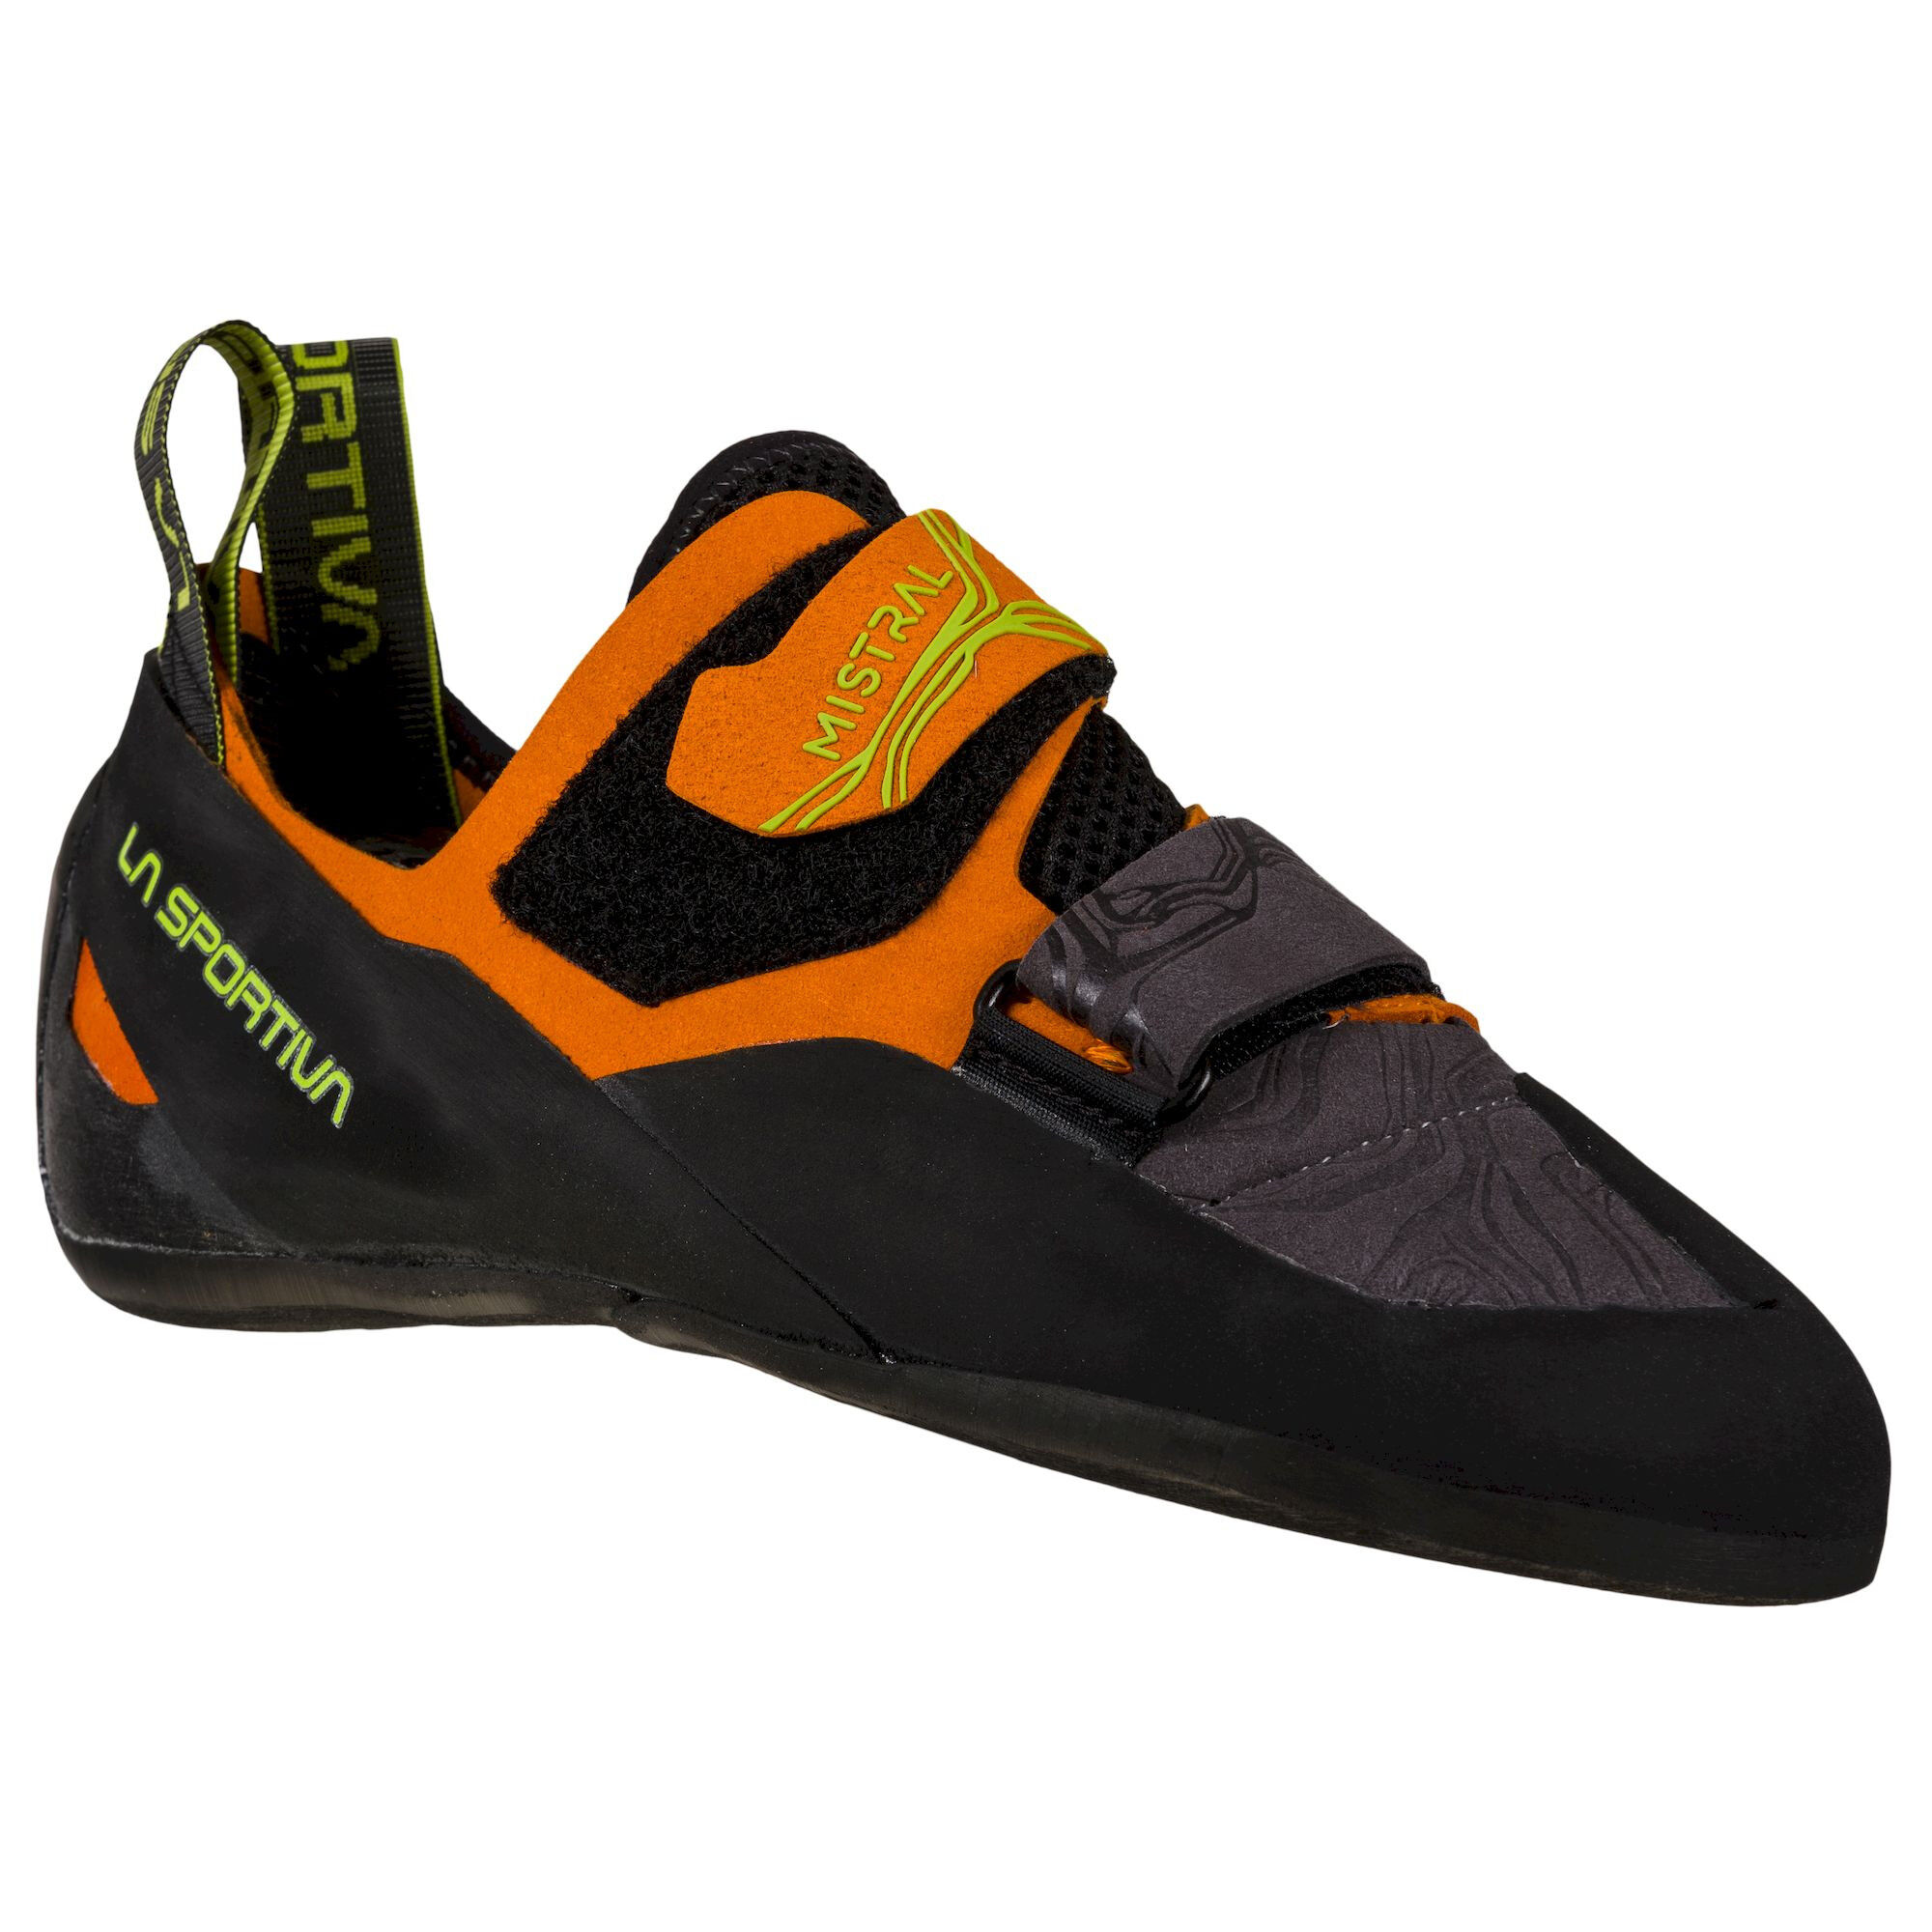 La Sportiva Mistral - Chaussons escalade homme | Hardloop